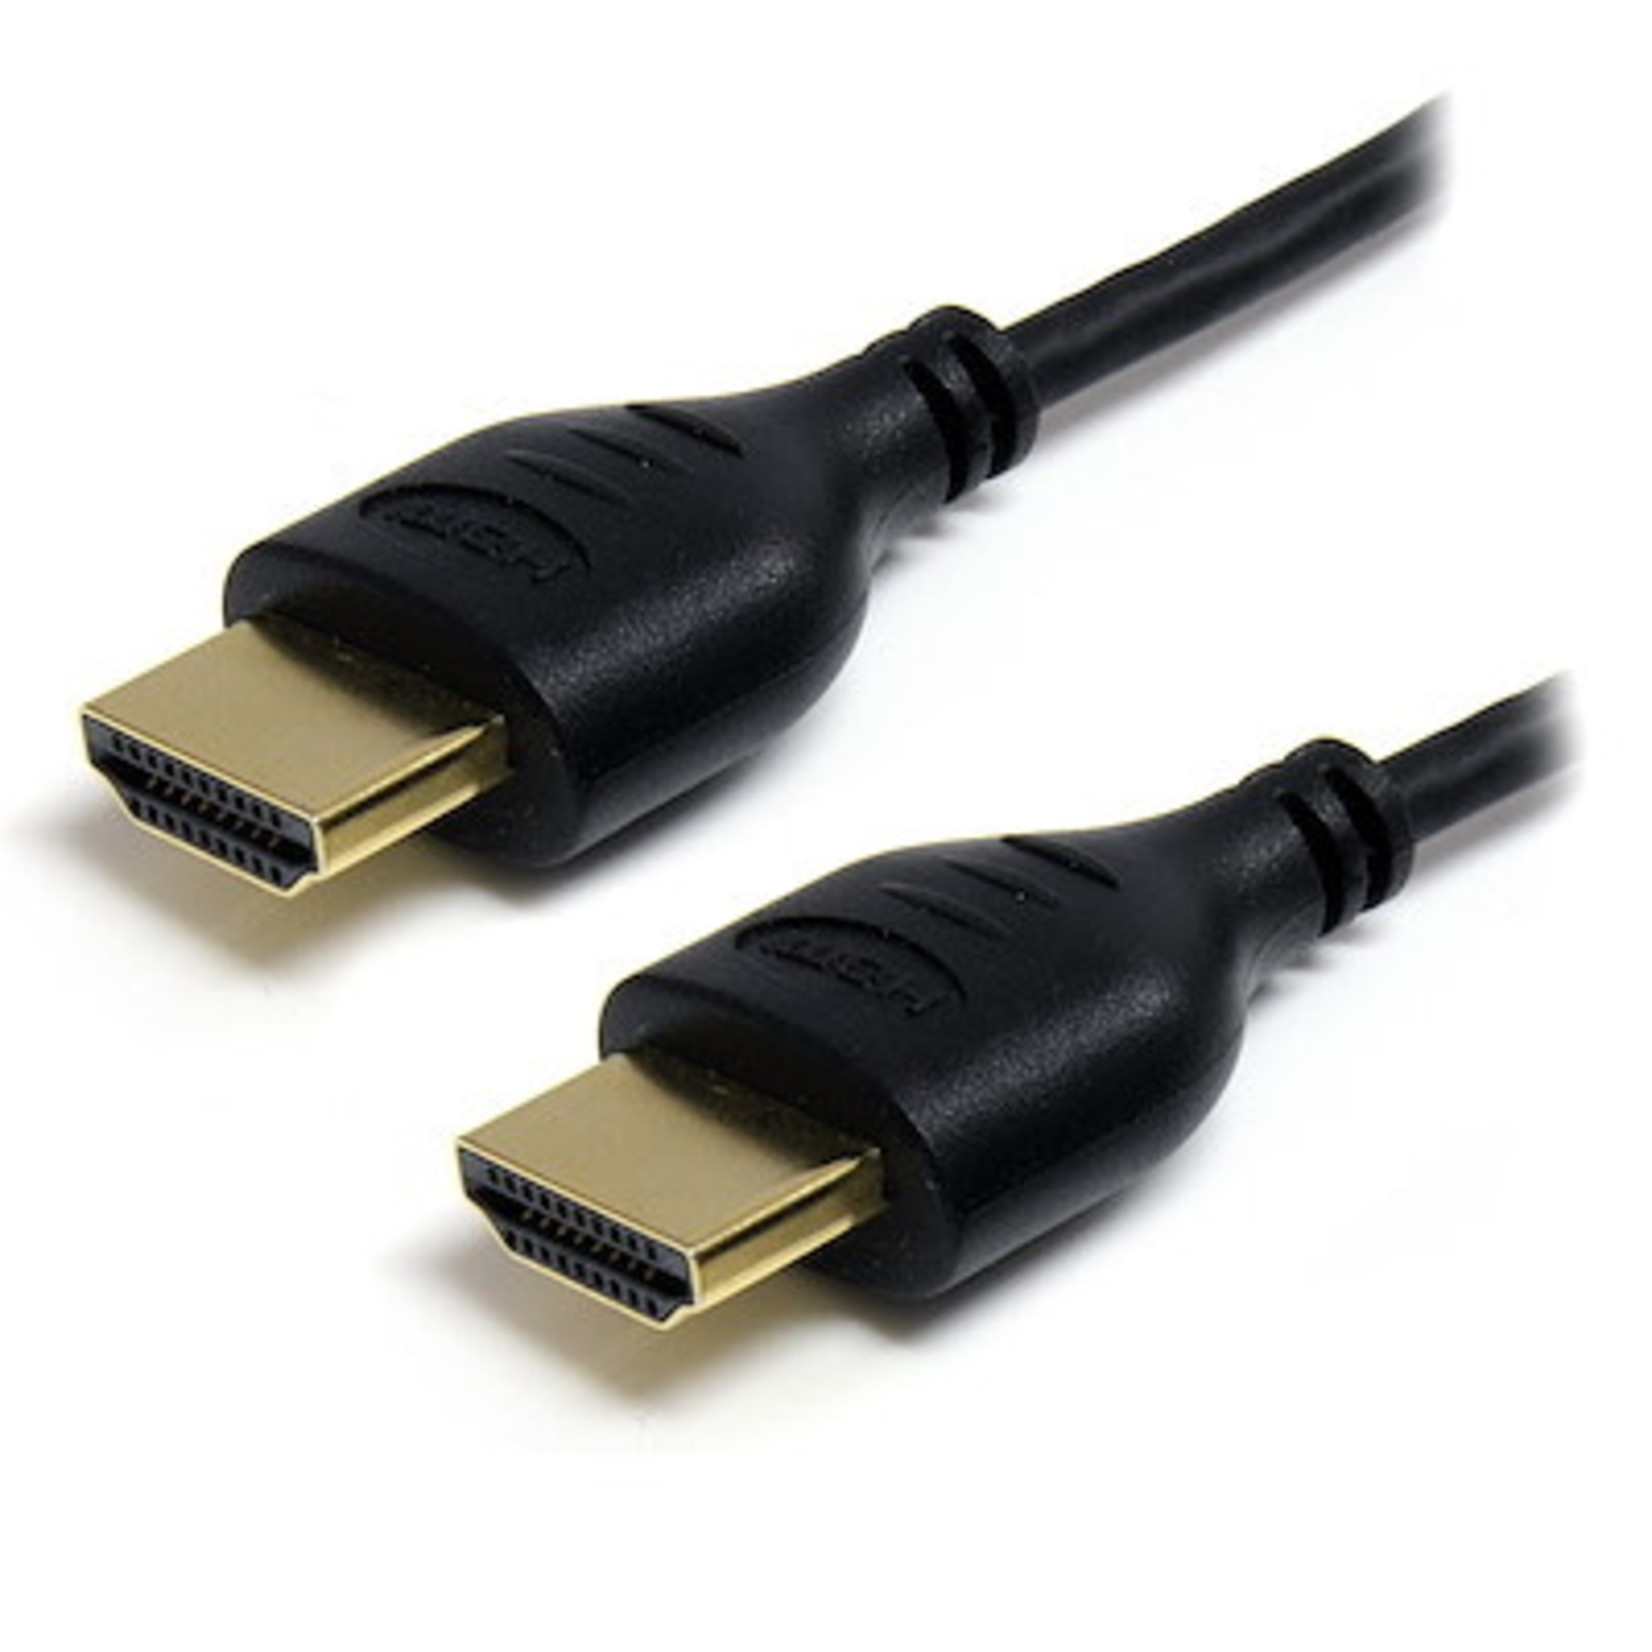 MISC HDMI 2.0 (6FT) w/ETHERNET & 4K VIDEO